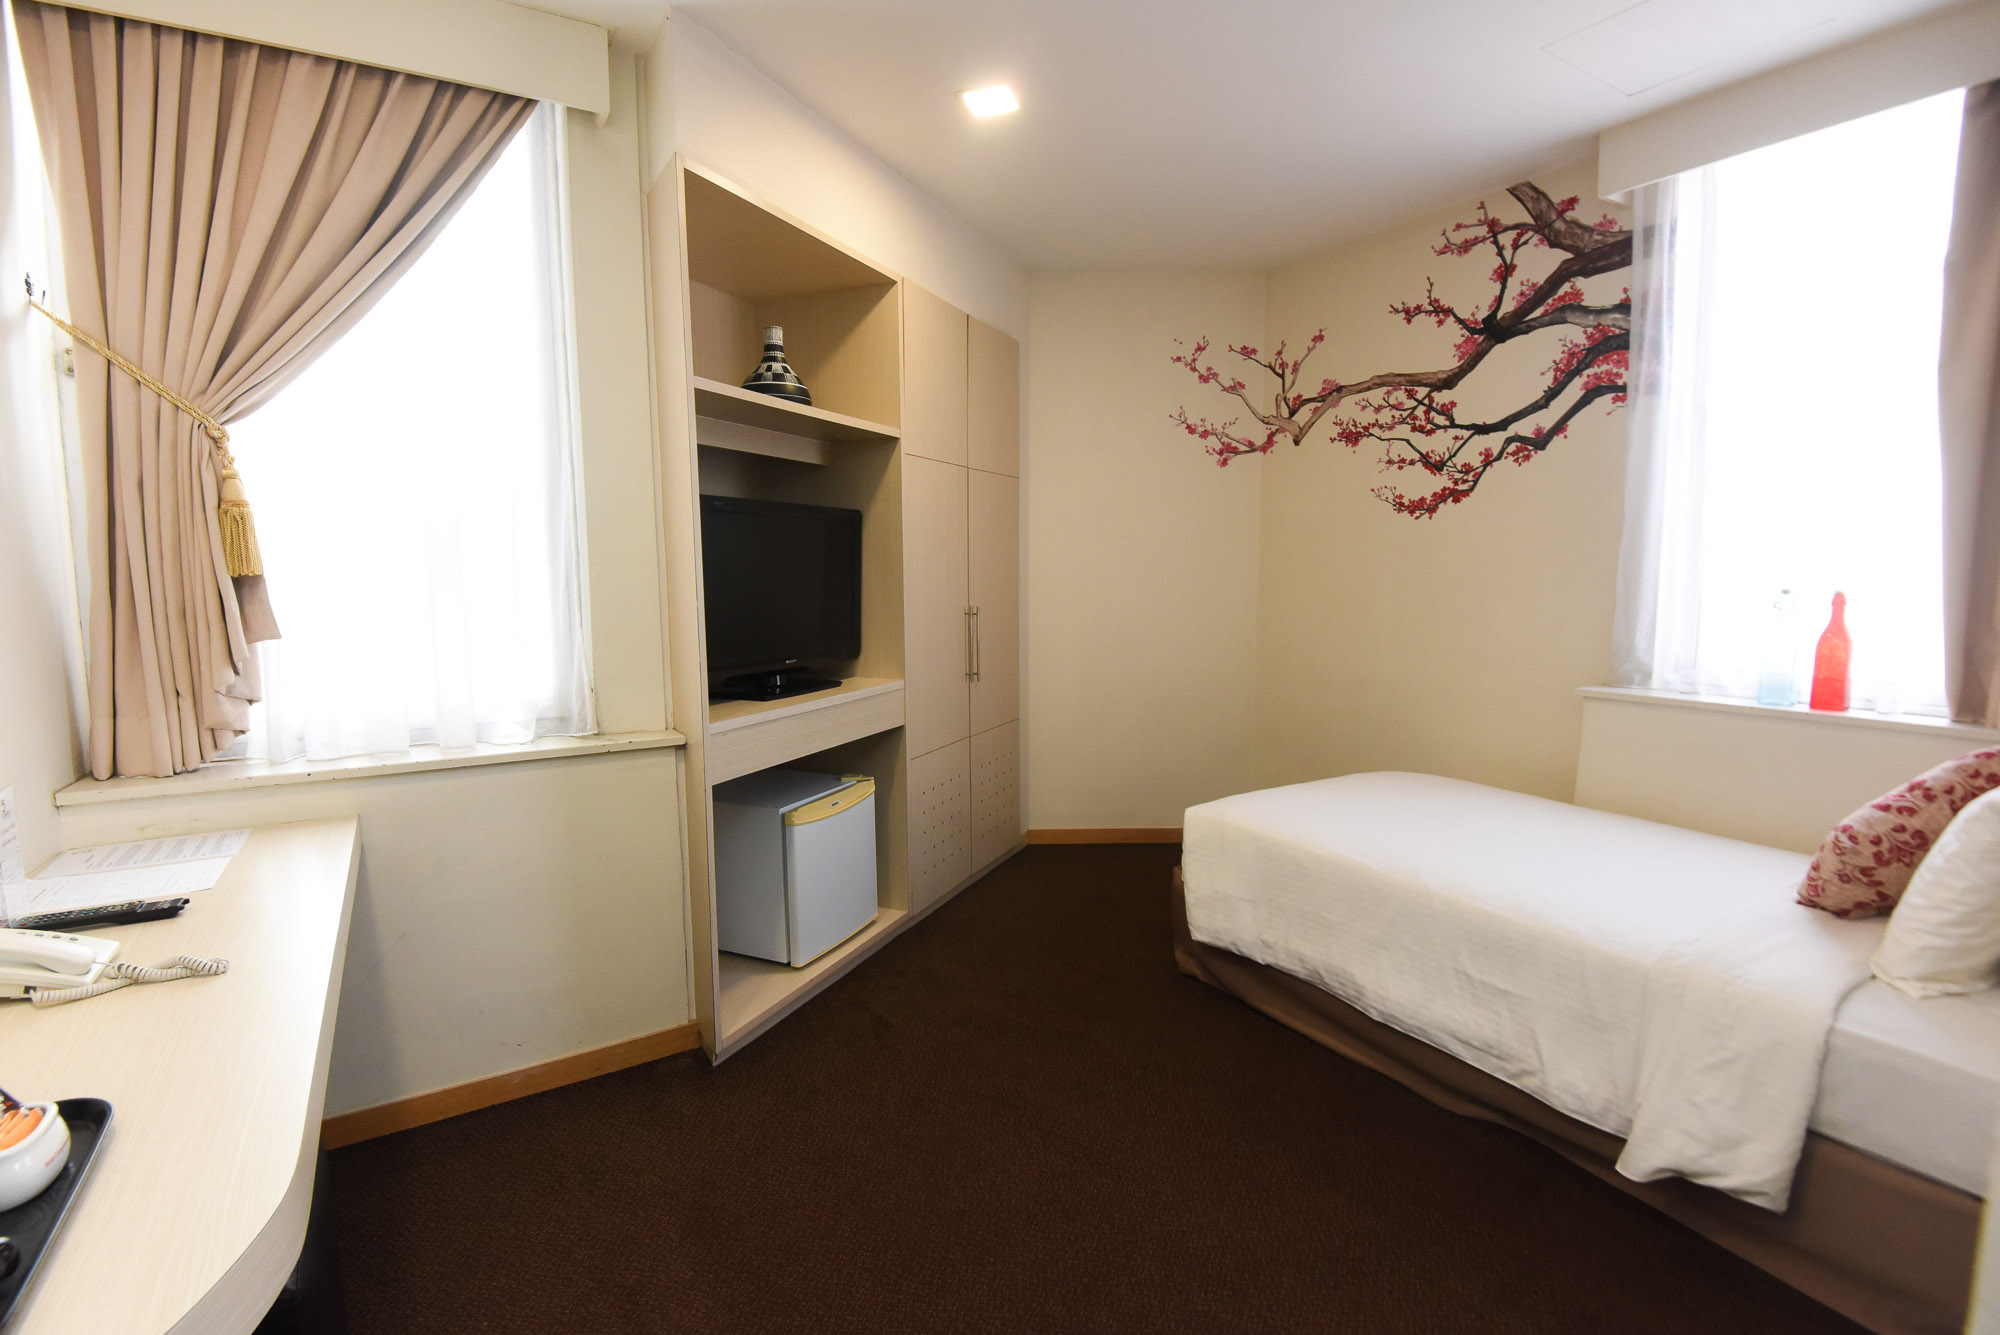 Perfect for the single traveller looking for a relaxing rest after a long day. The Standard Single room is equipped with the standard amenities such as air-conditioning, shower facilities, complimentary WiFi, in-room safe and much more to ensure a comfort stay.